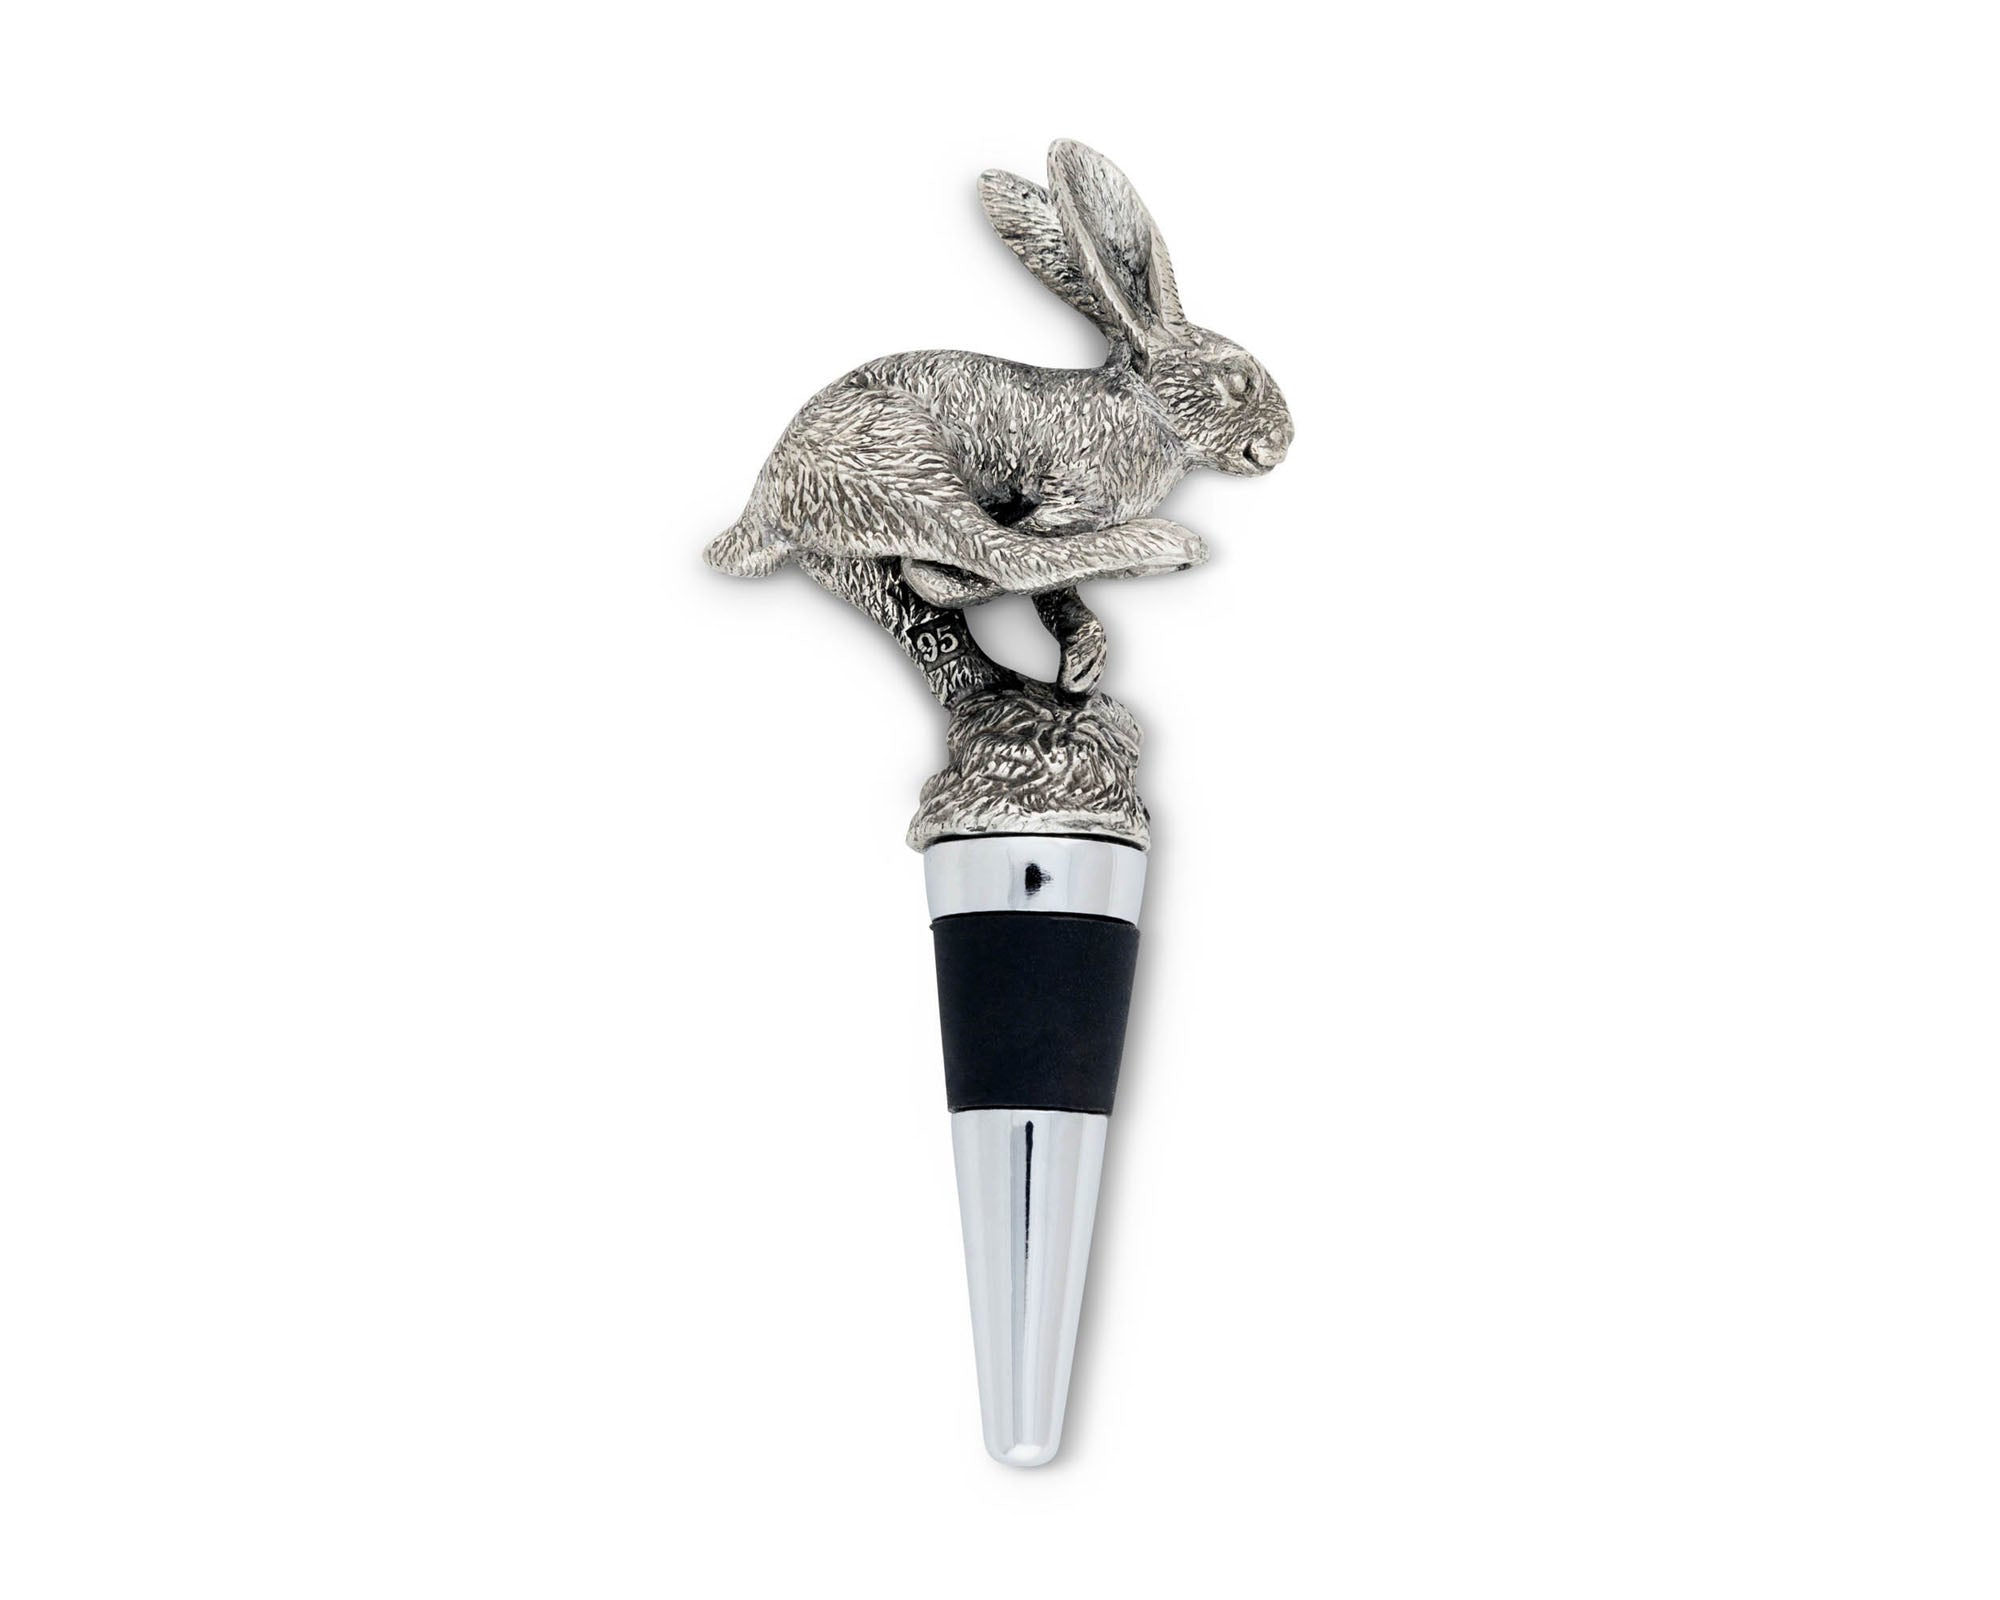 Vagabond House Pewter Jumping Hare Bottle Stopper Product Image